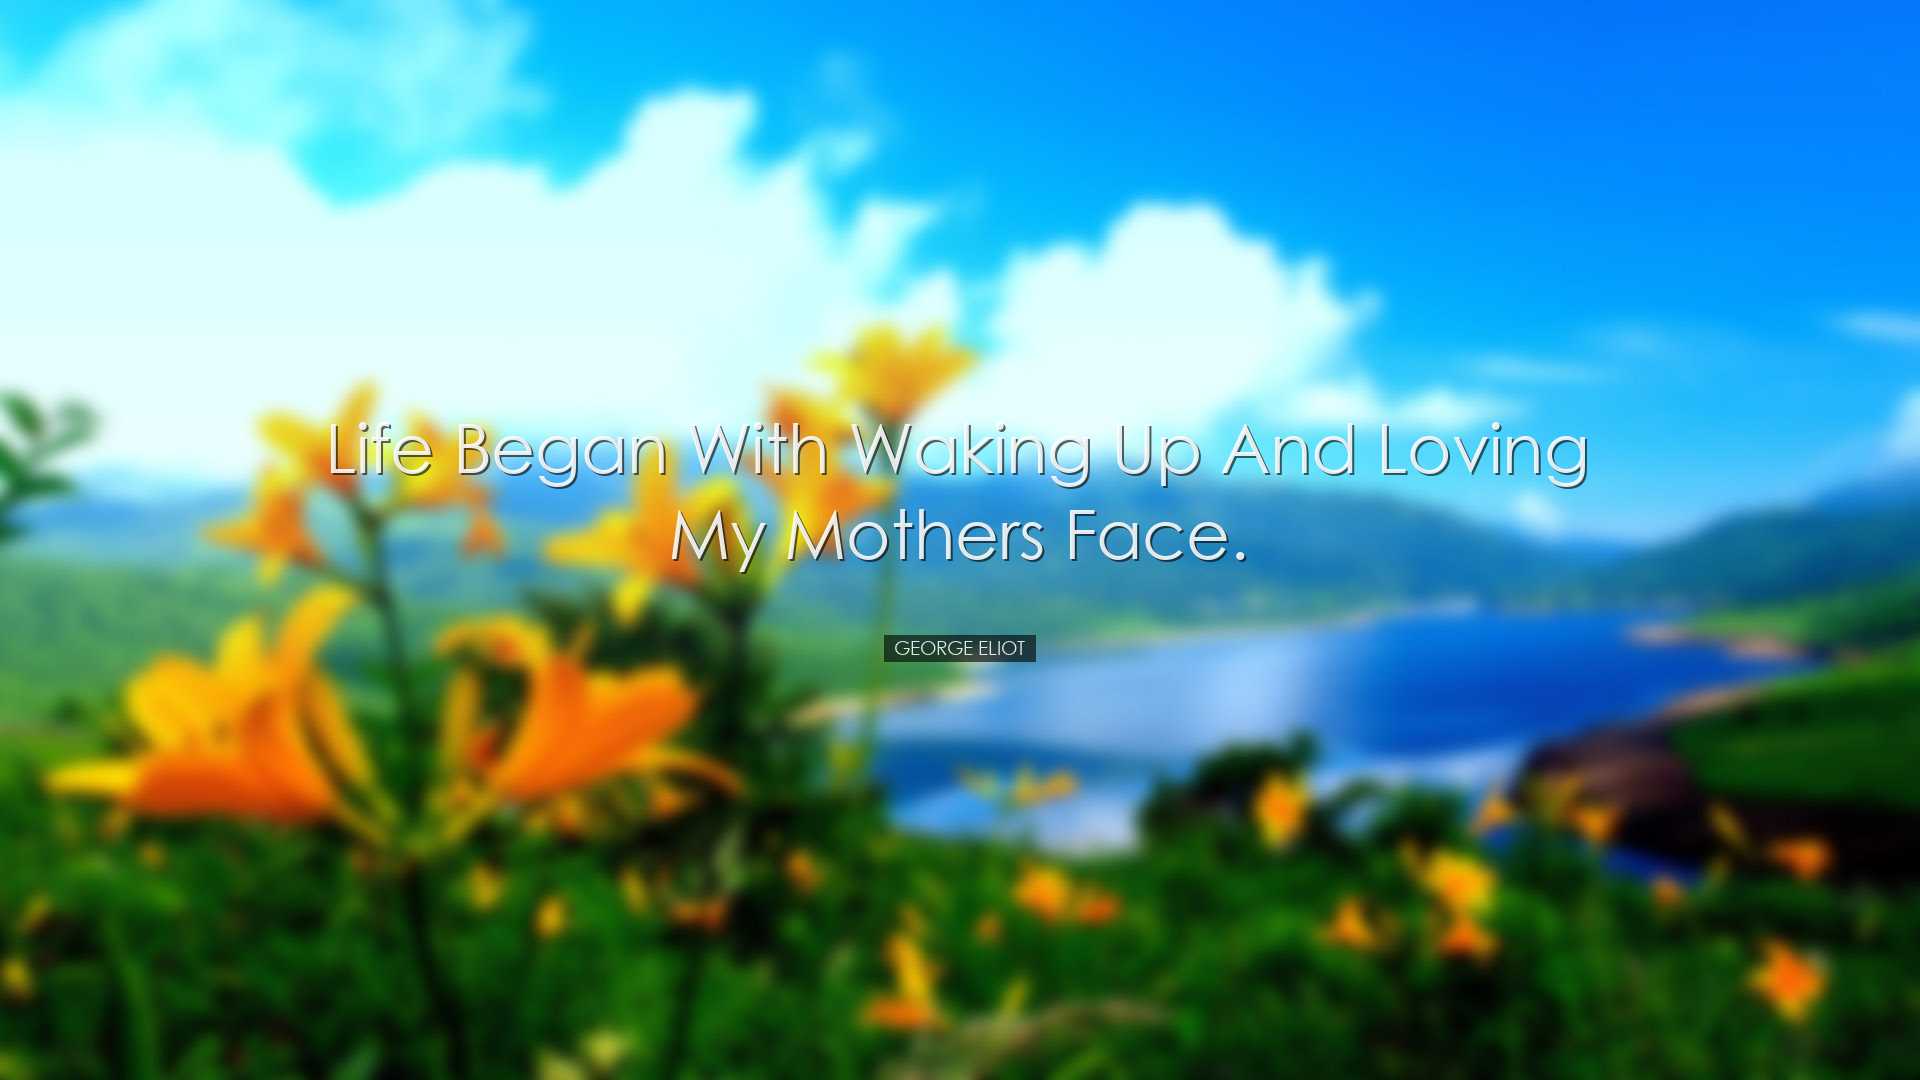 Life began with waking up and loving my mothers face. - George Eli